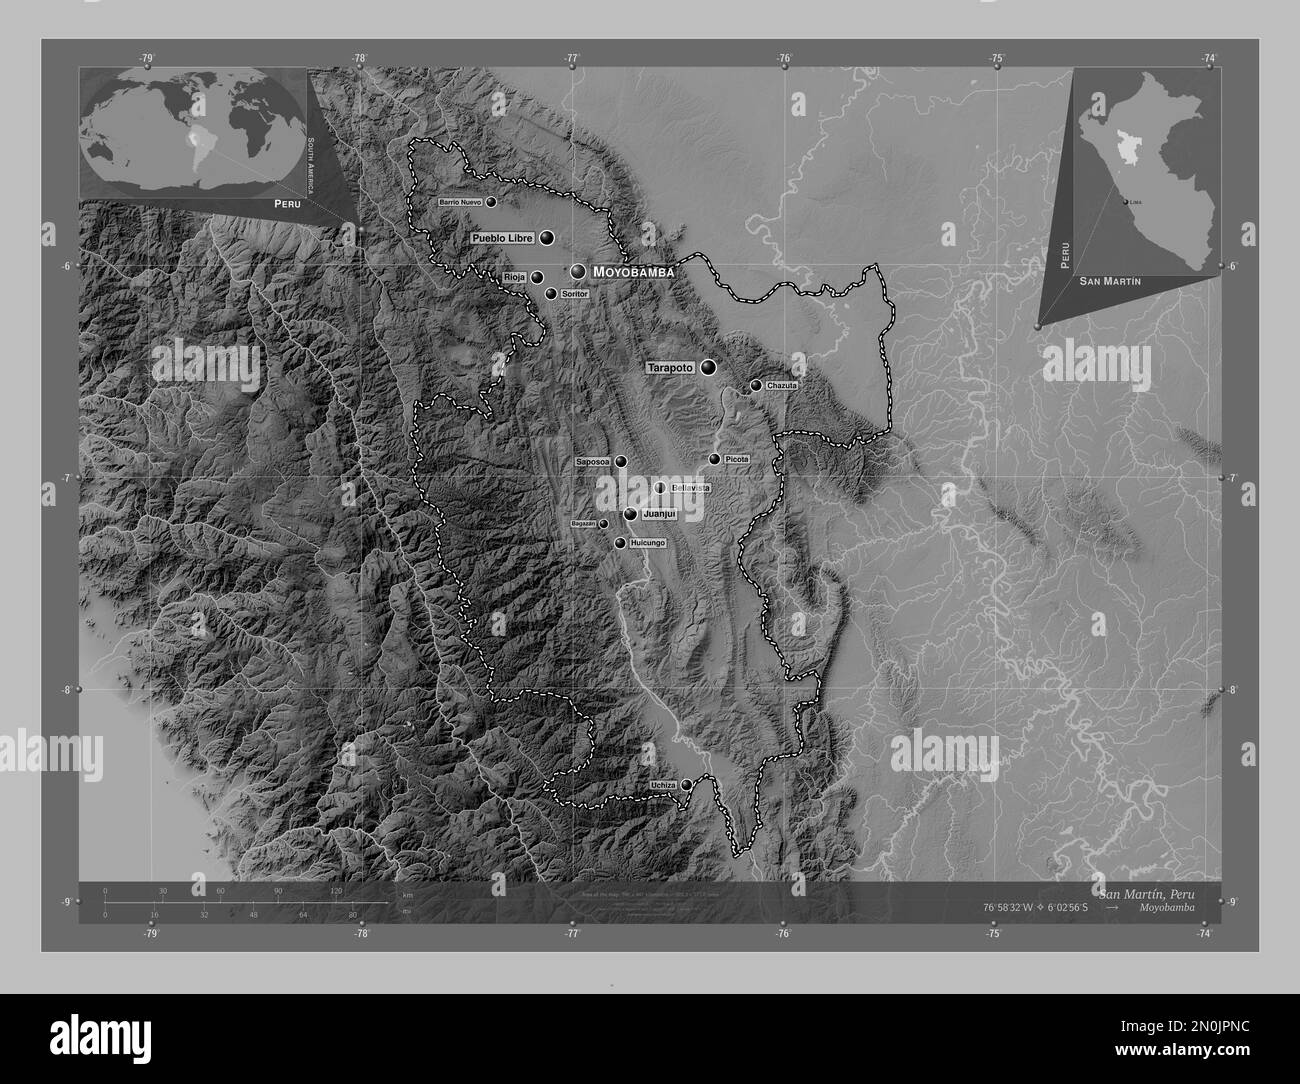 San Martin, region of Peru. Grayscale elevation map with lakes and rivers. Locations and names of major cities of the region. Corner auxiliary locatio Stock Photo